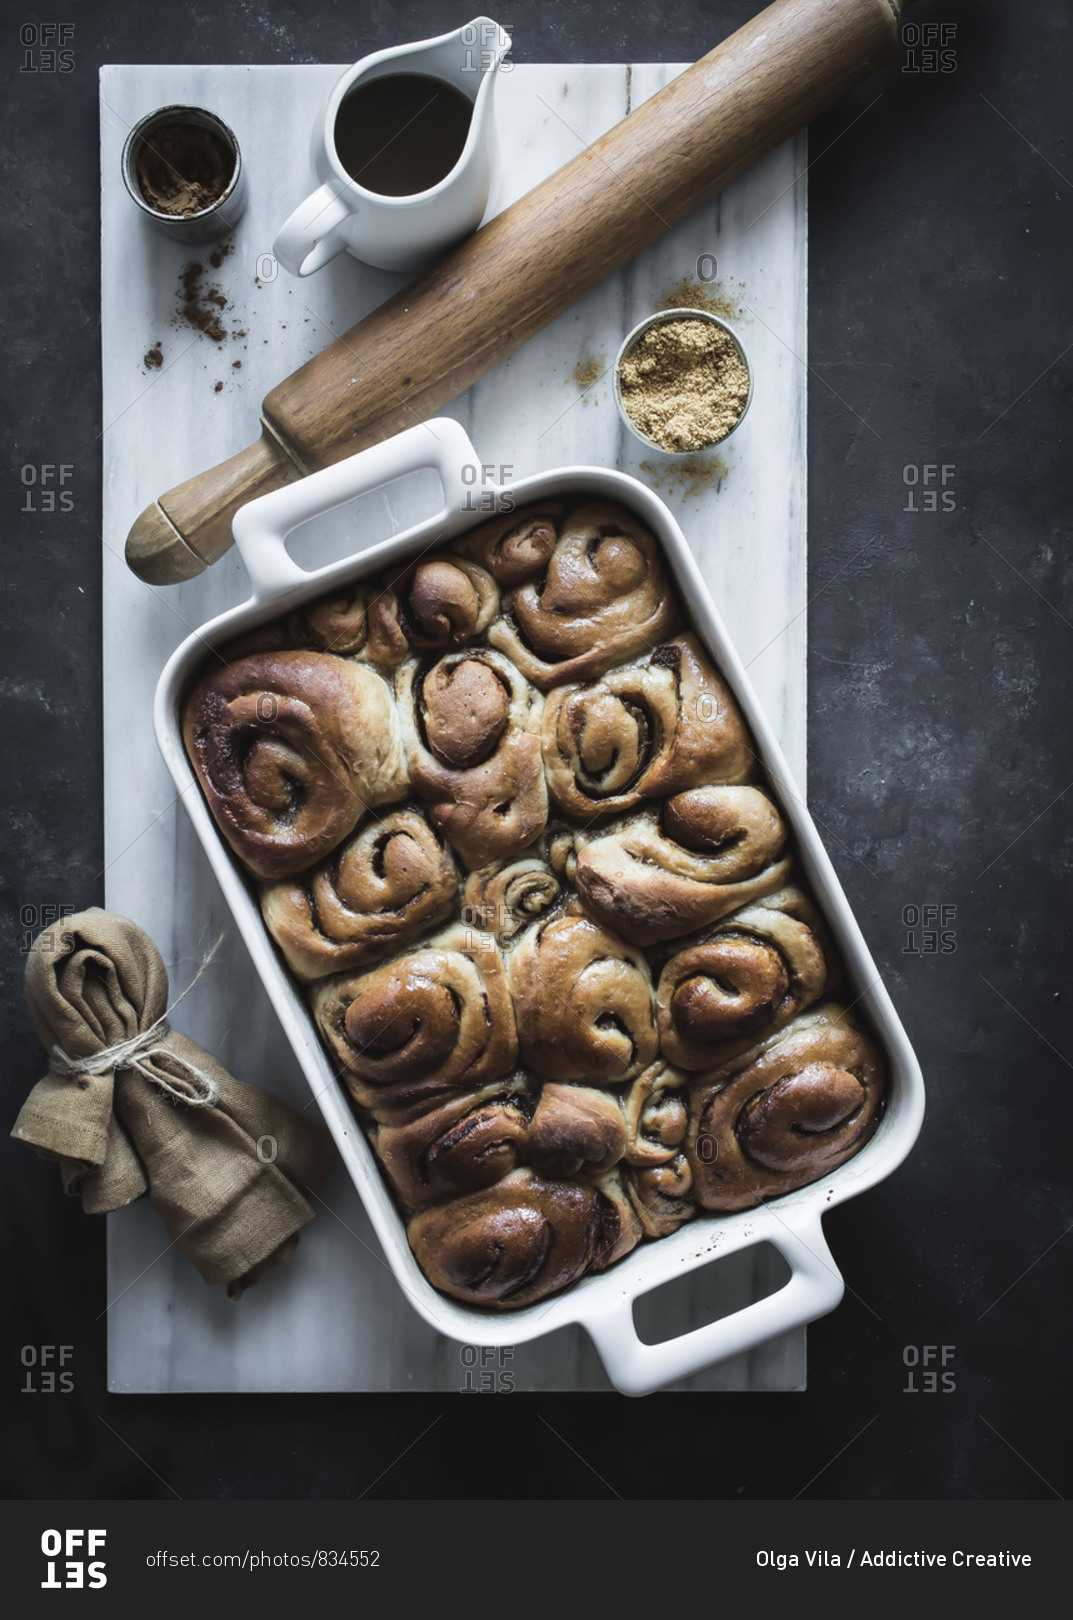 From above tray with fresh homemade cinnamon buns and wooden rolling pin on white marble board